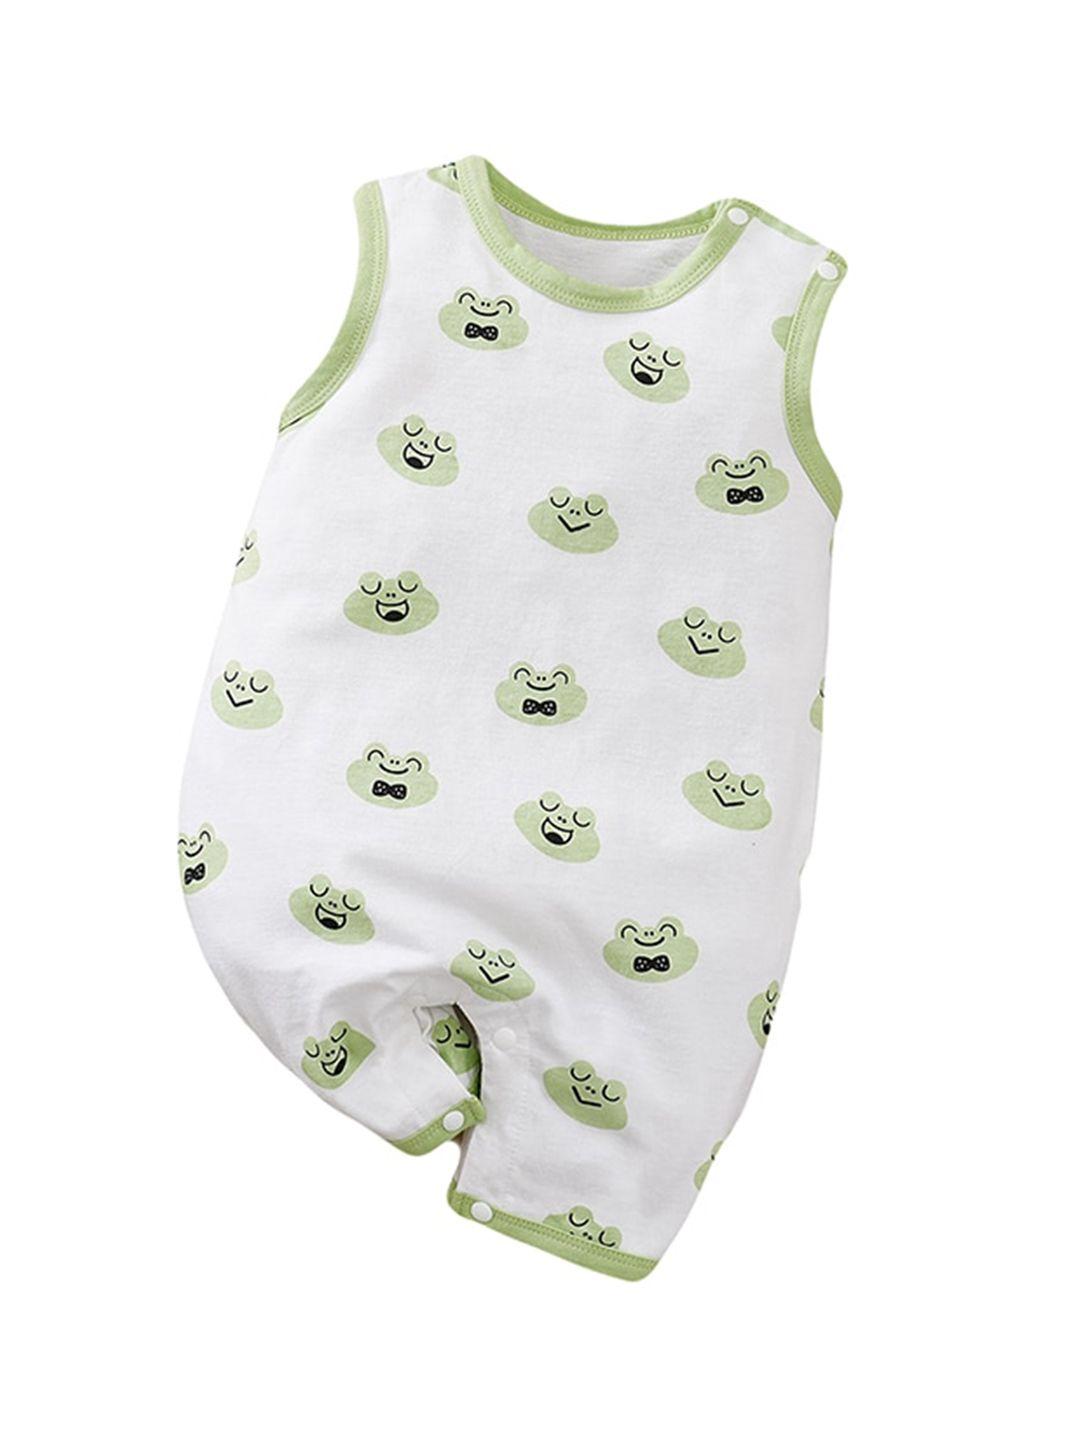 stylecast infant boys white graphic printed pure cotton rompers